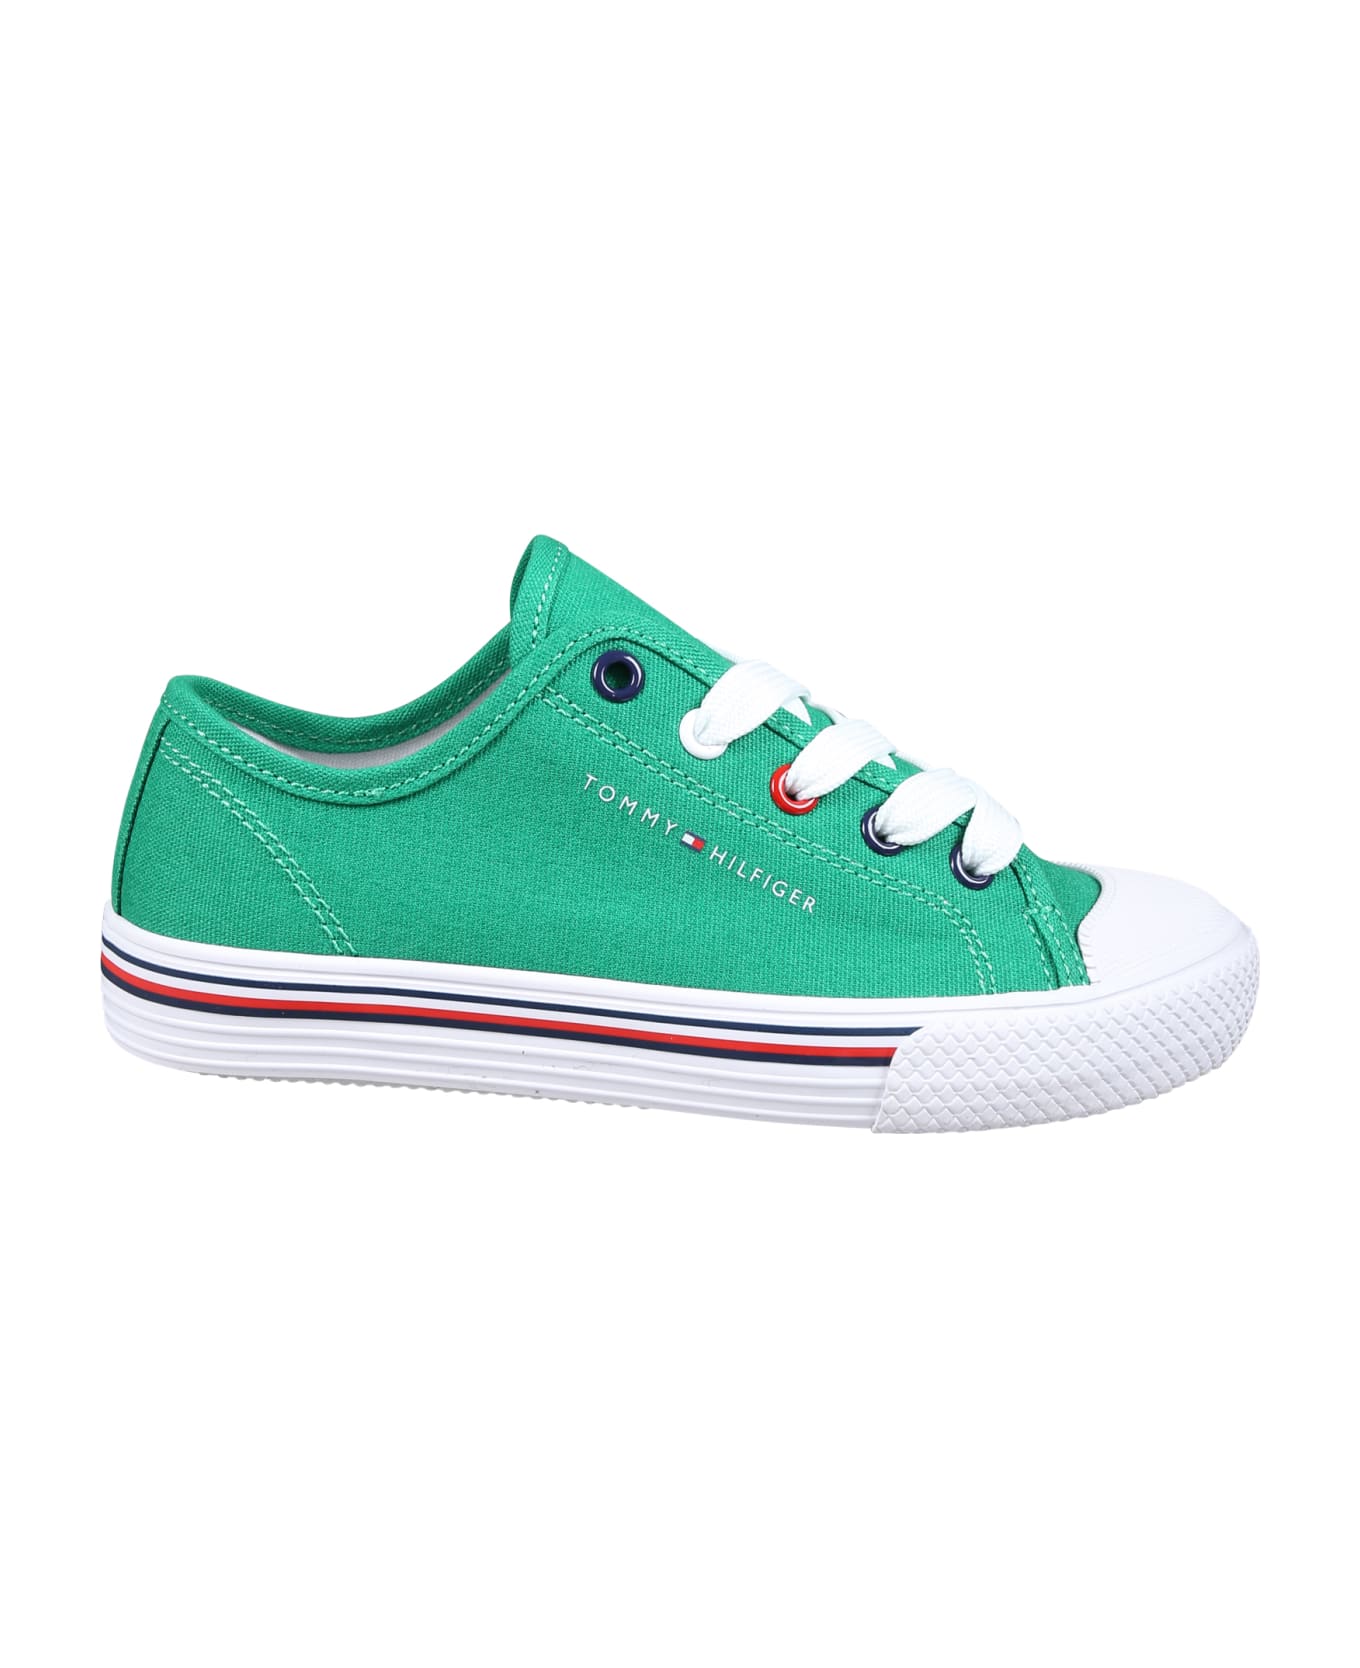 Tommy Hilfiger Green Sneakers For Kids With Logo - Green シューズ